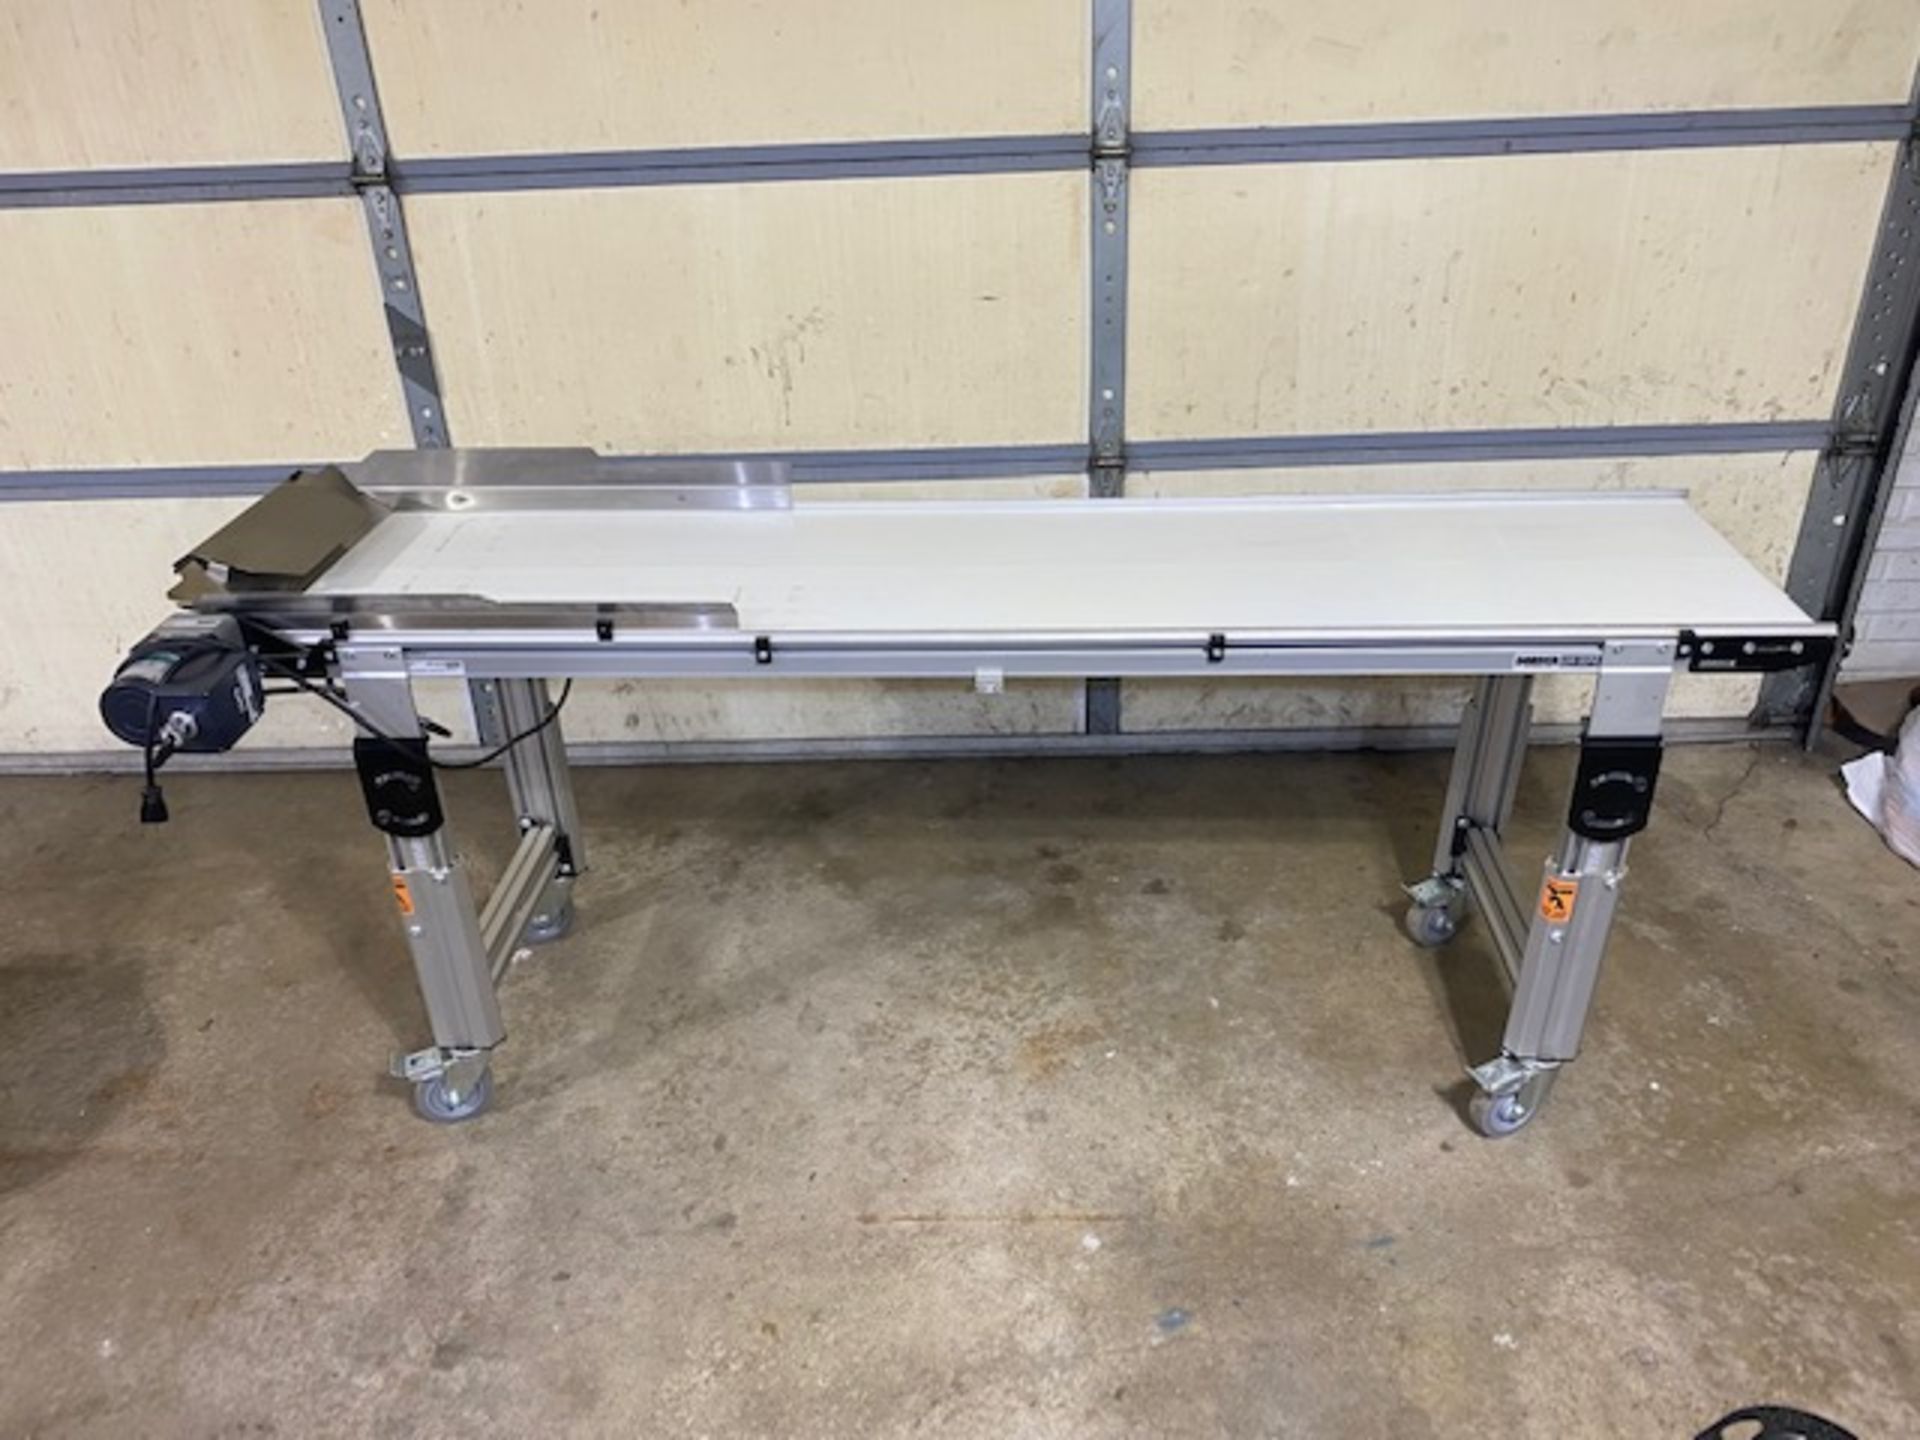 Used Mobius Trimmers Set Up w/ (2) Mobius Trimmers. Model M108S, Conveyors, & Hot Swap Kit - Image 13 of 13